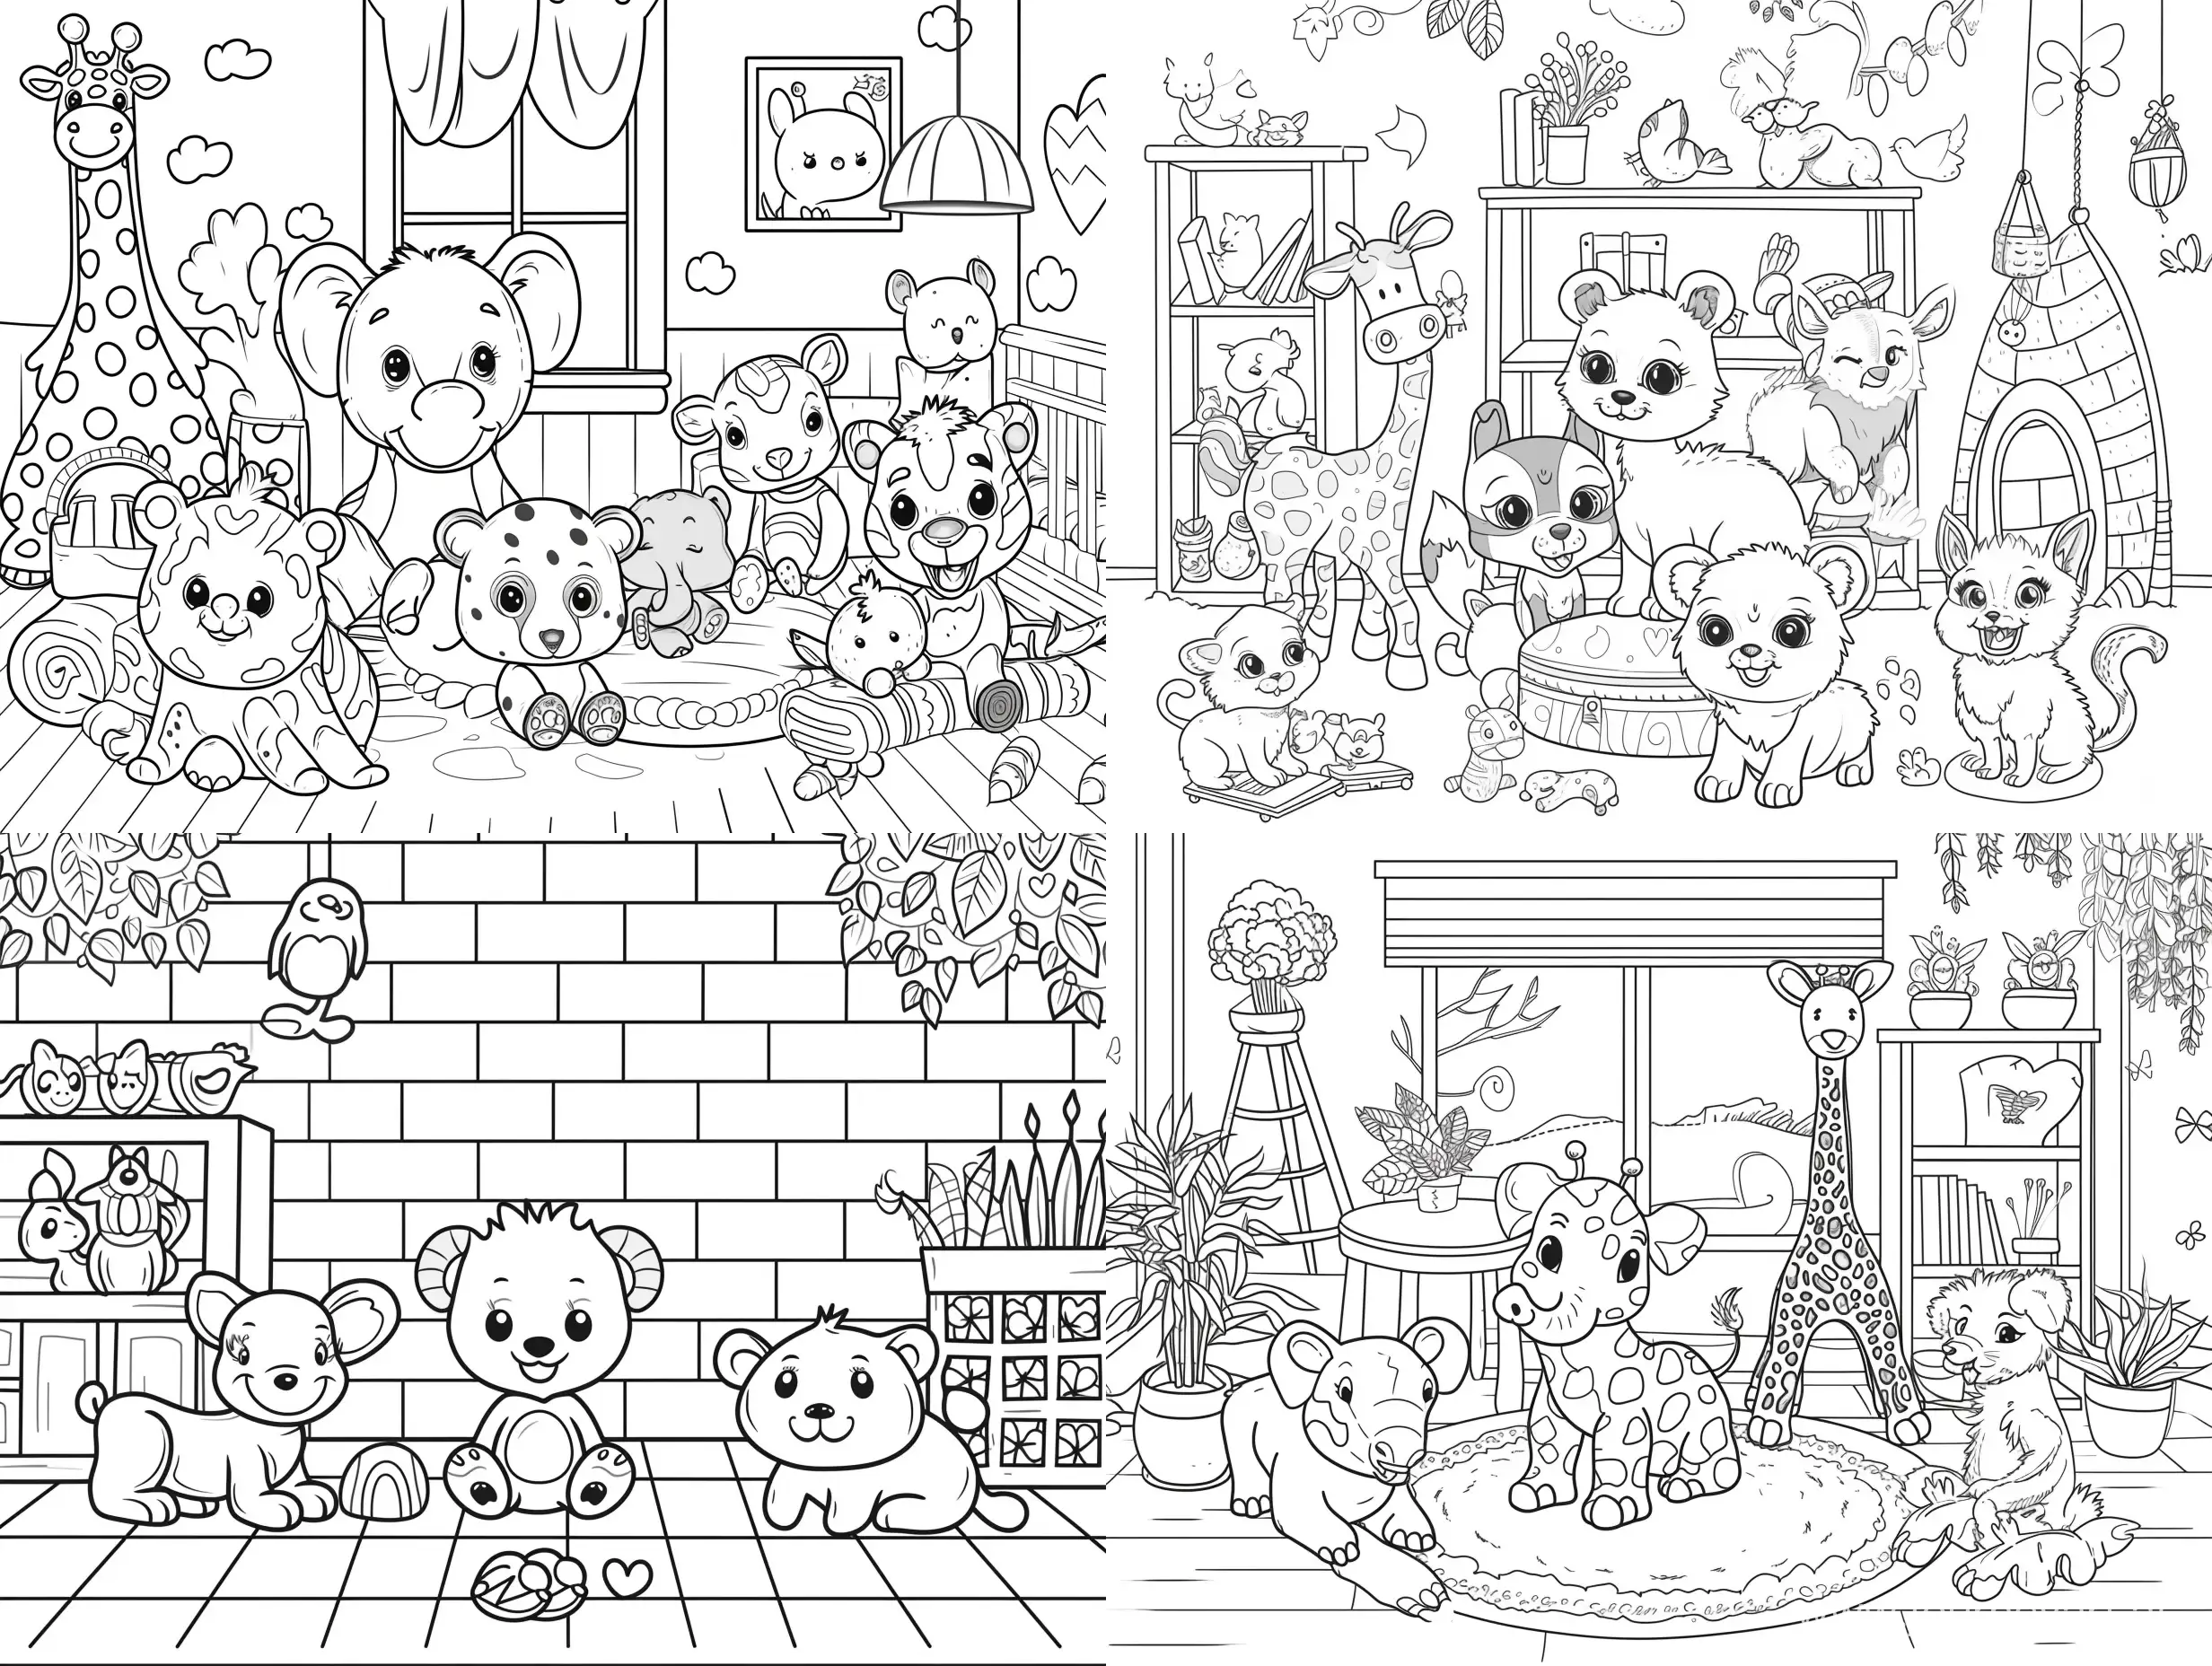 Happy-Cartoon-Animals-Coloring-Page-for-Kids